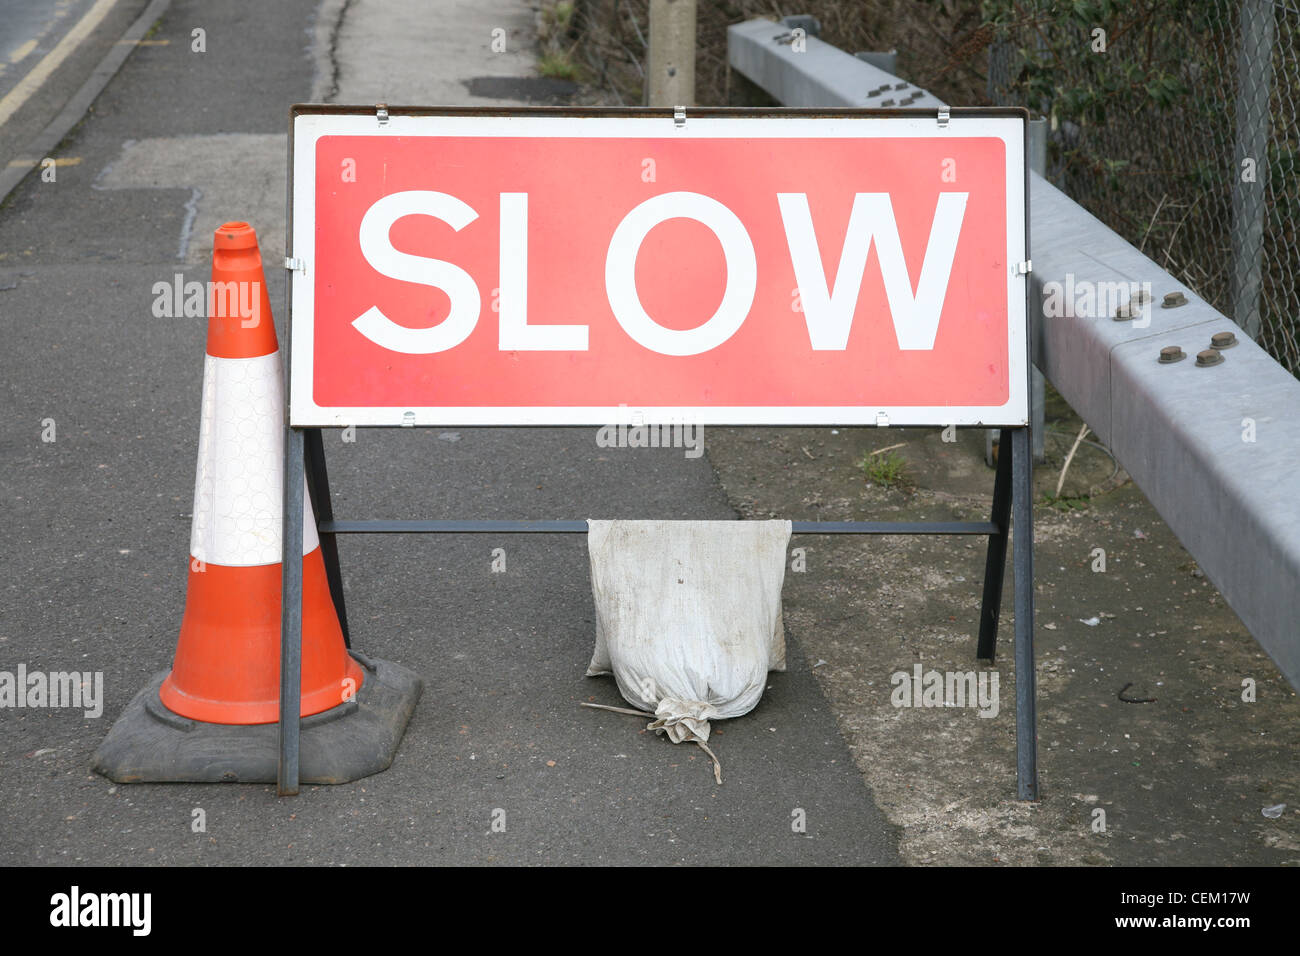 slow sign warning of roadworks ahead Stock Photo